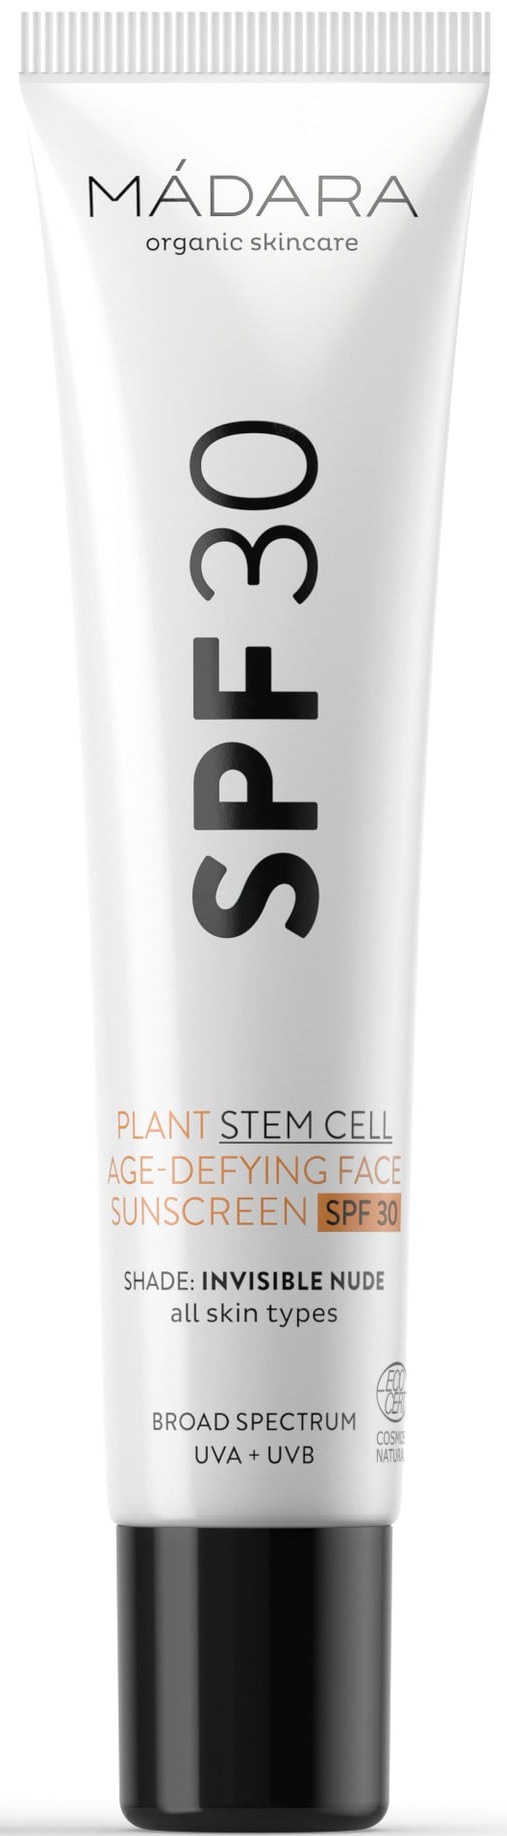 Madara Plant Stem Cell Age-Defying Face Sunscreen SPF 30